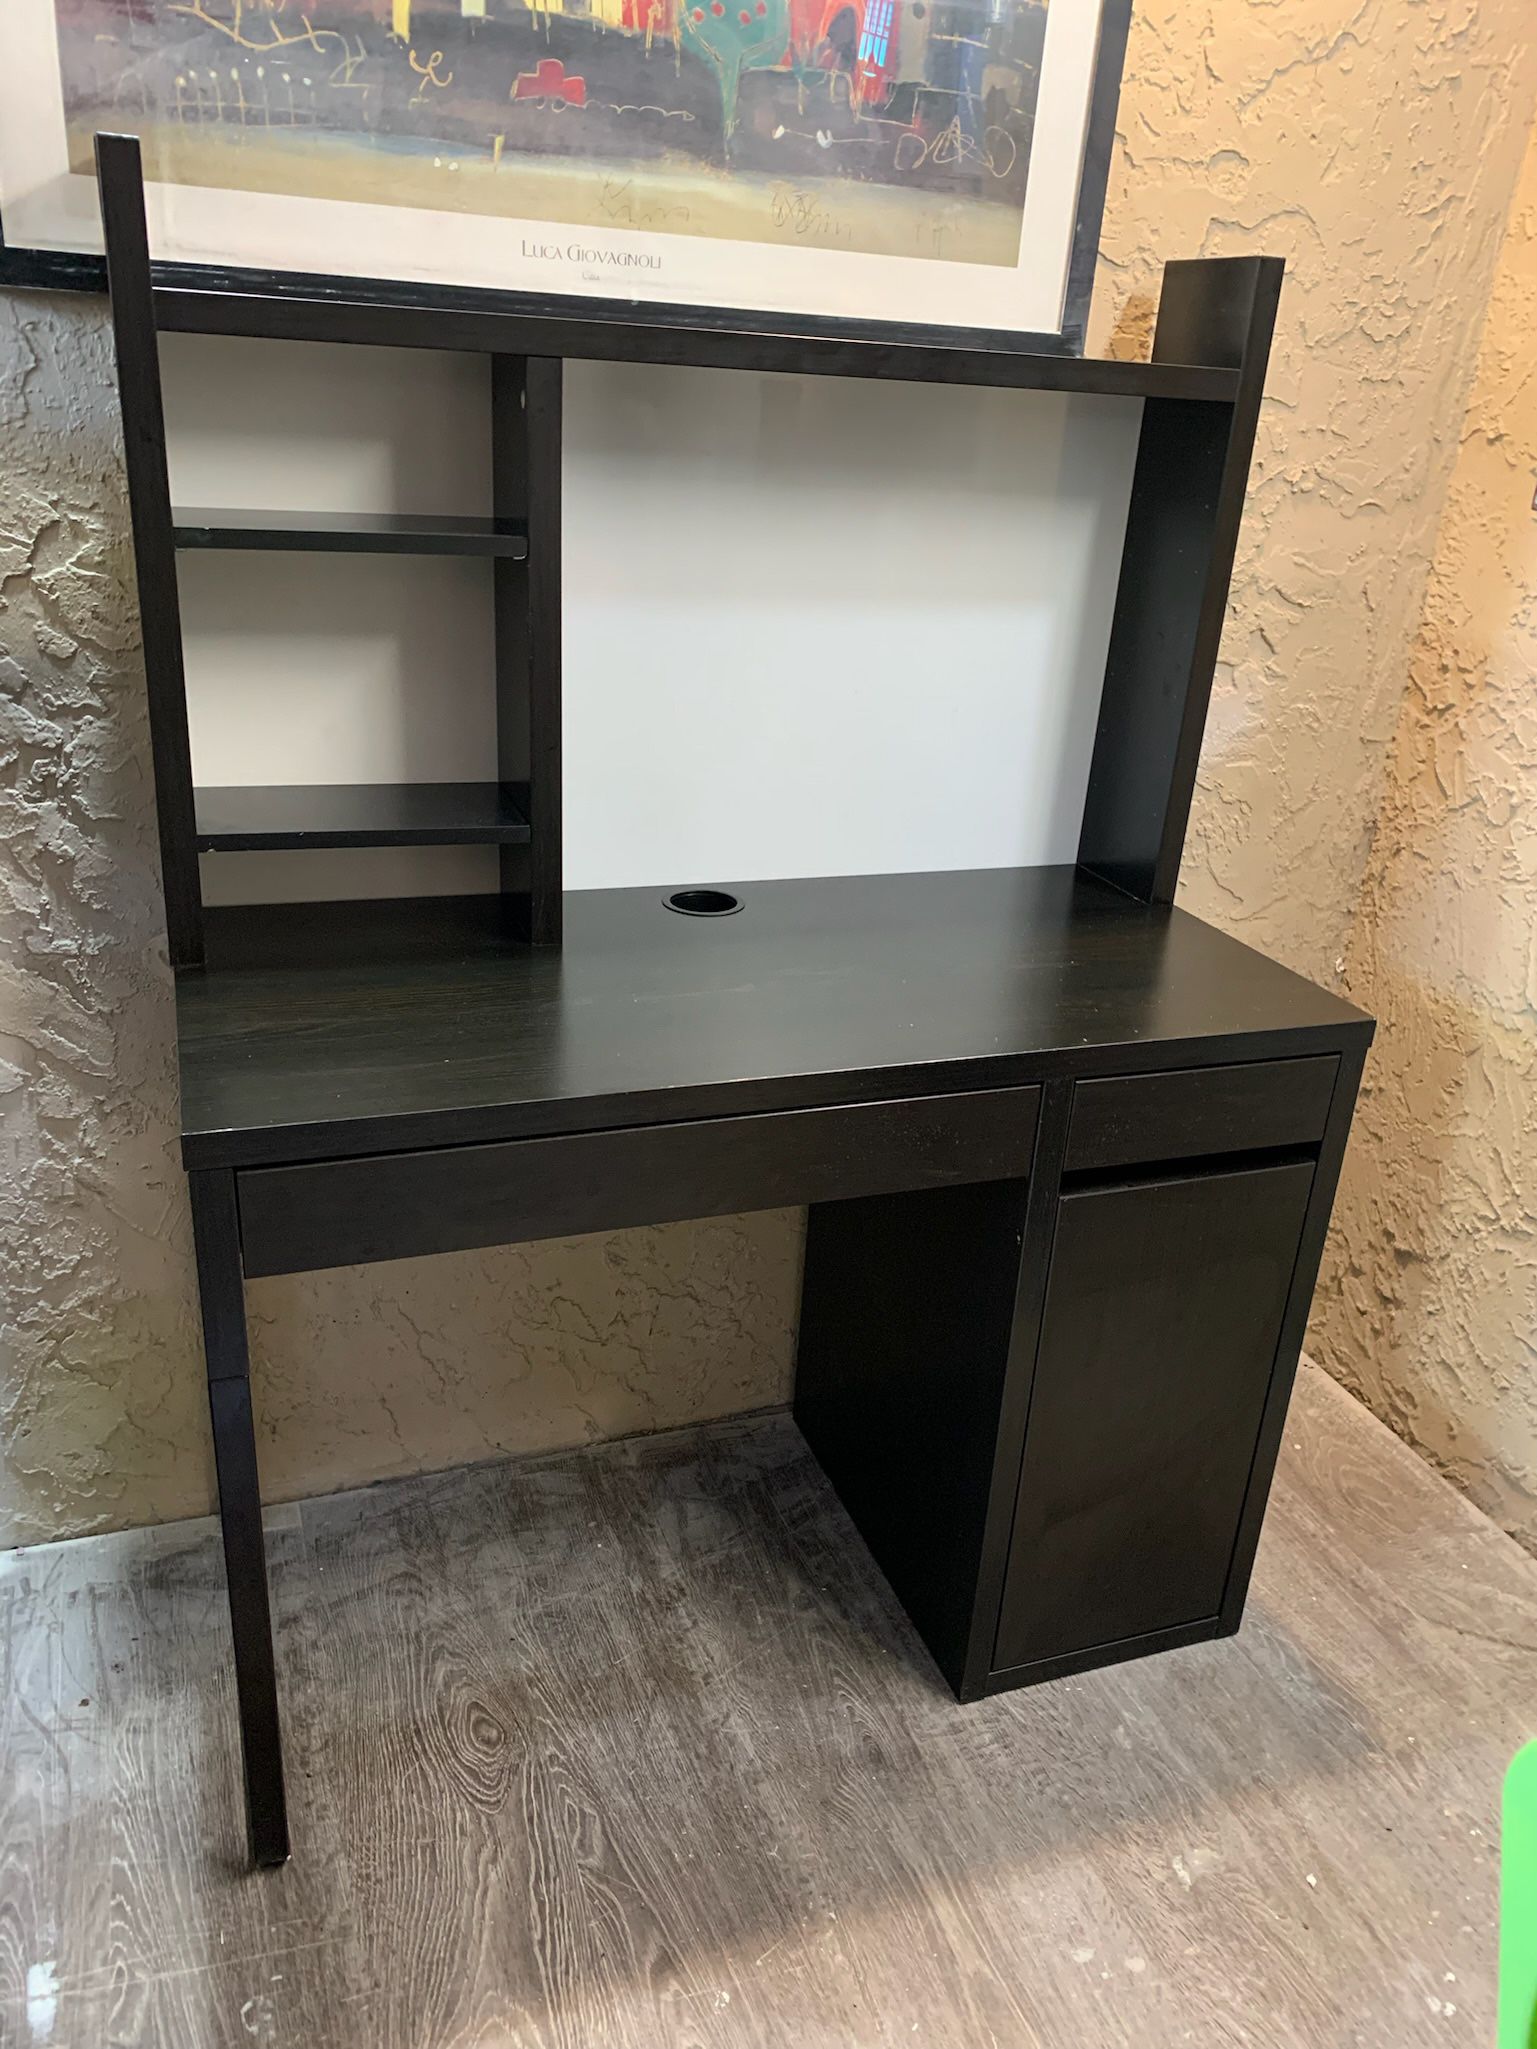 IKEA MICKE BLACK BROWN DESK WITH HUTCH - Delivery For A Fee - See My Other Items 😃